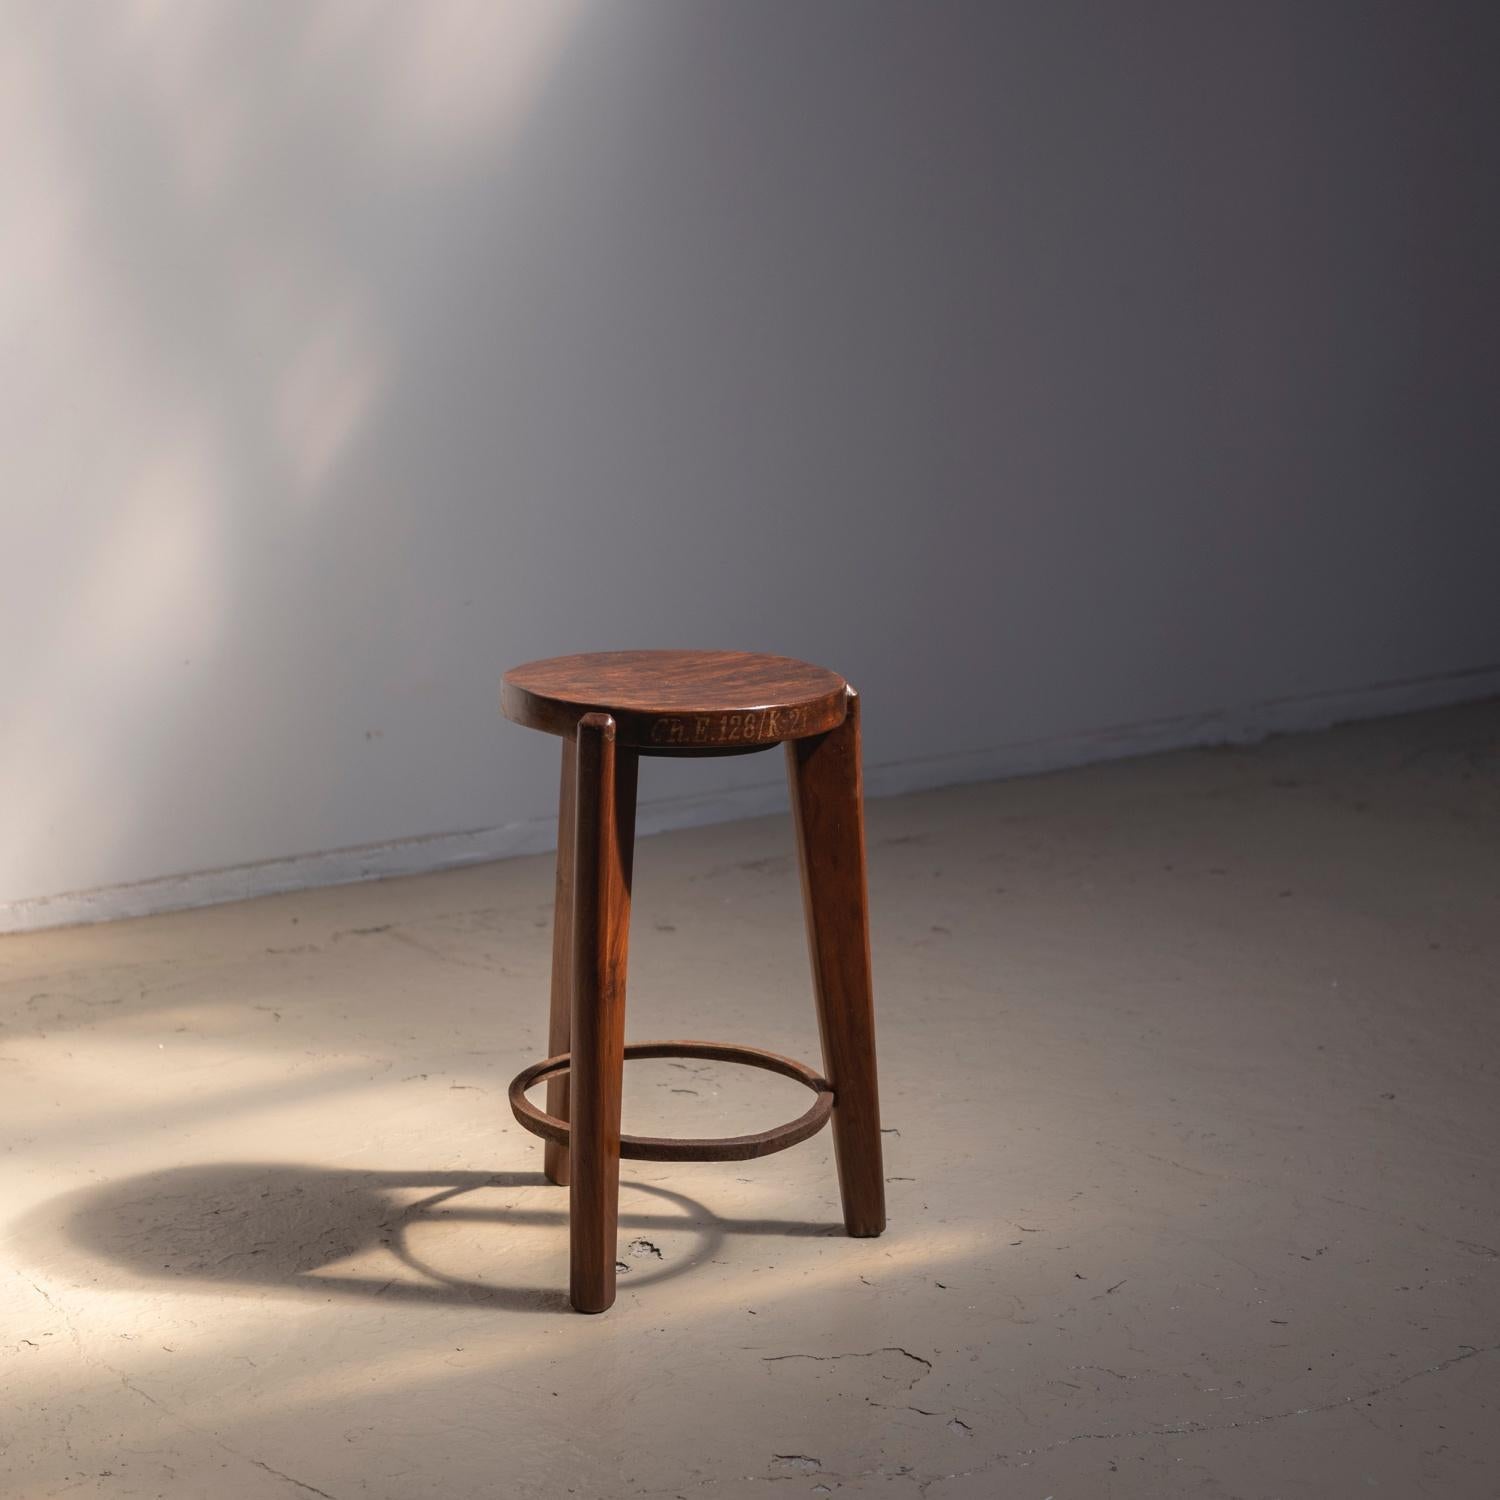 Indian Pierre Jeanneret Round Stool in Teak and Iron, Chandigarh, 1960-1965